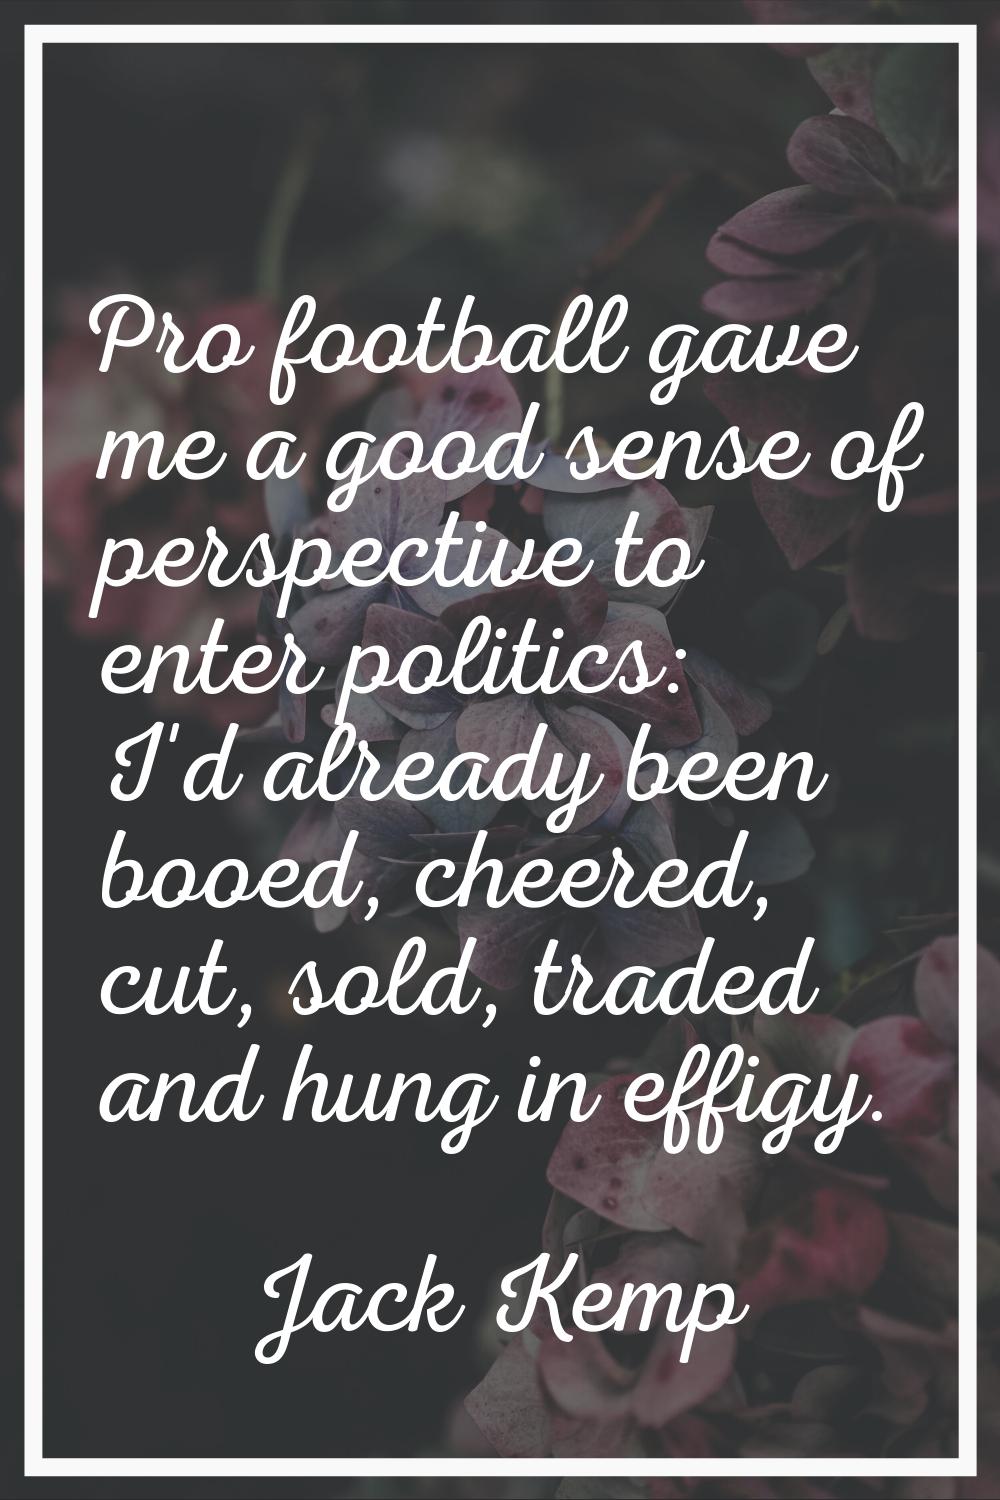 Pro football gave me a good sense of perspective to enter politics: I'd already been booed, cheered